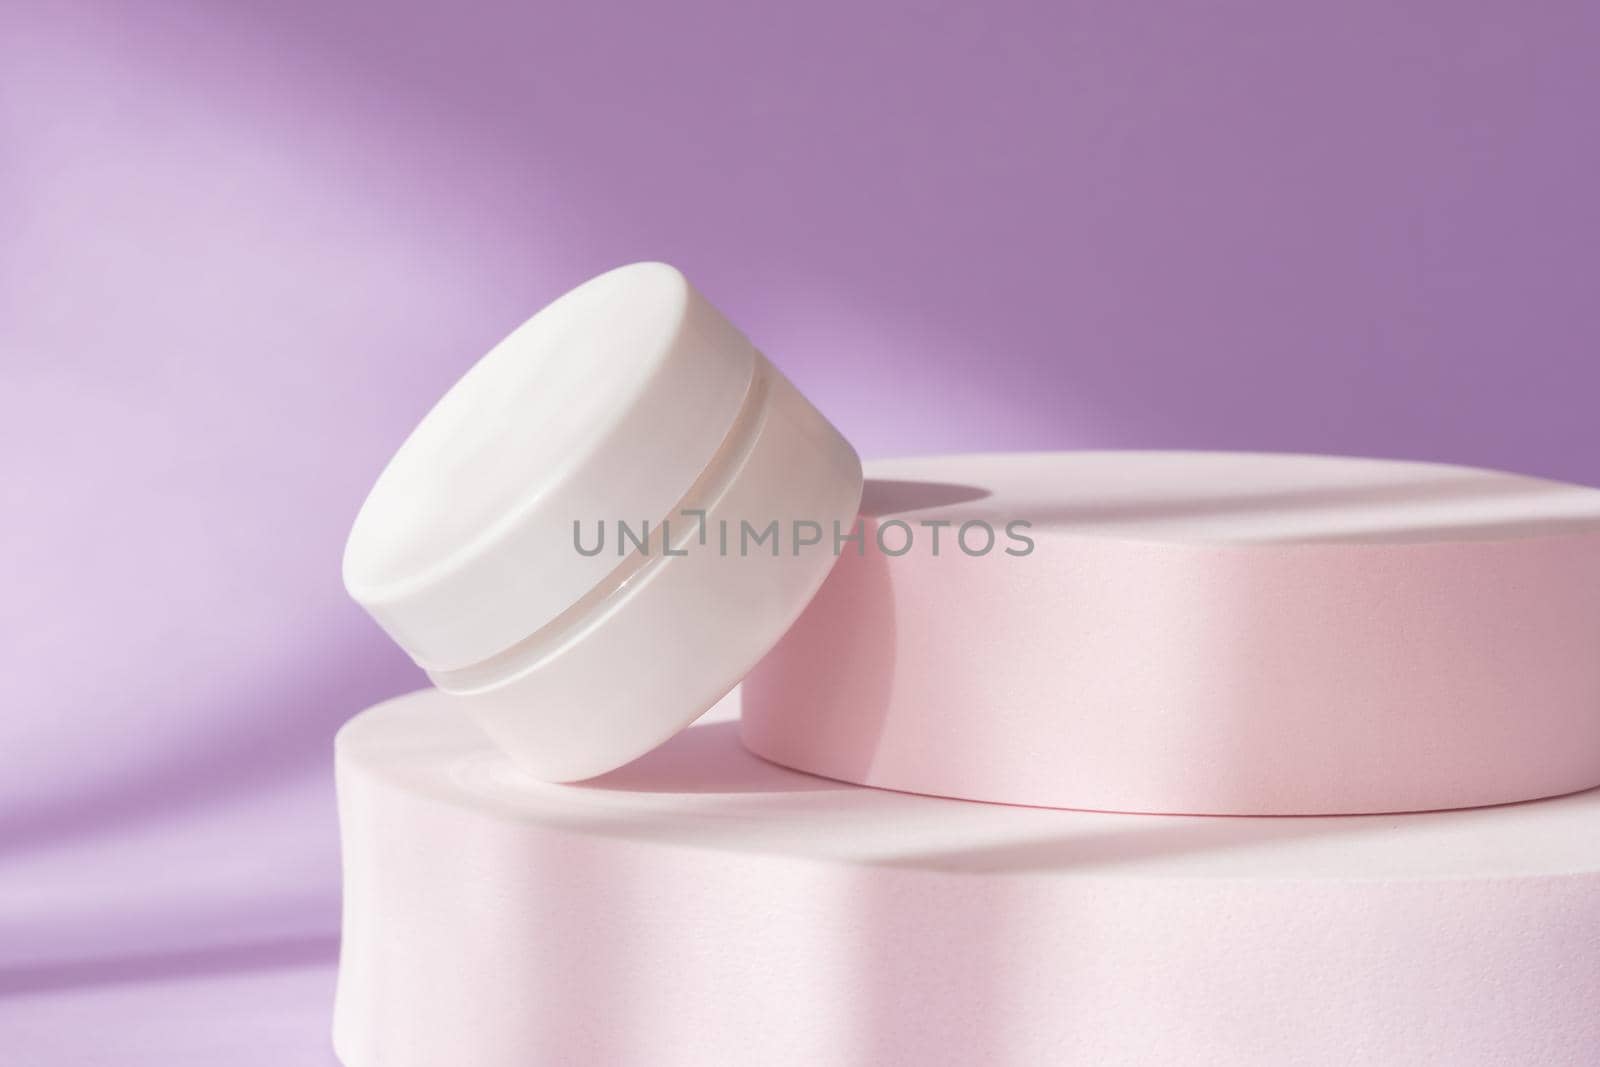 Beauty cosmetic cream jar mockup on purple podium showcase. White package container on pedestal, windows shadow background. Blank skin care product template, luxury skincare body moisturizer, mask